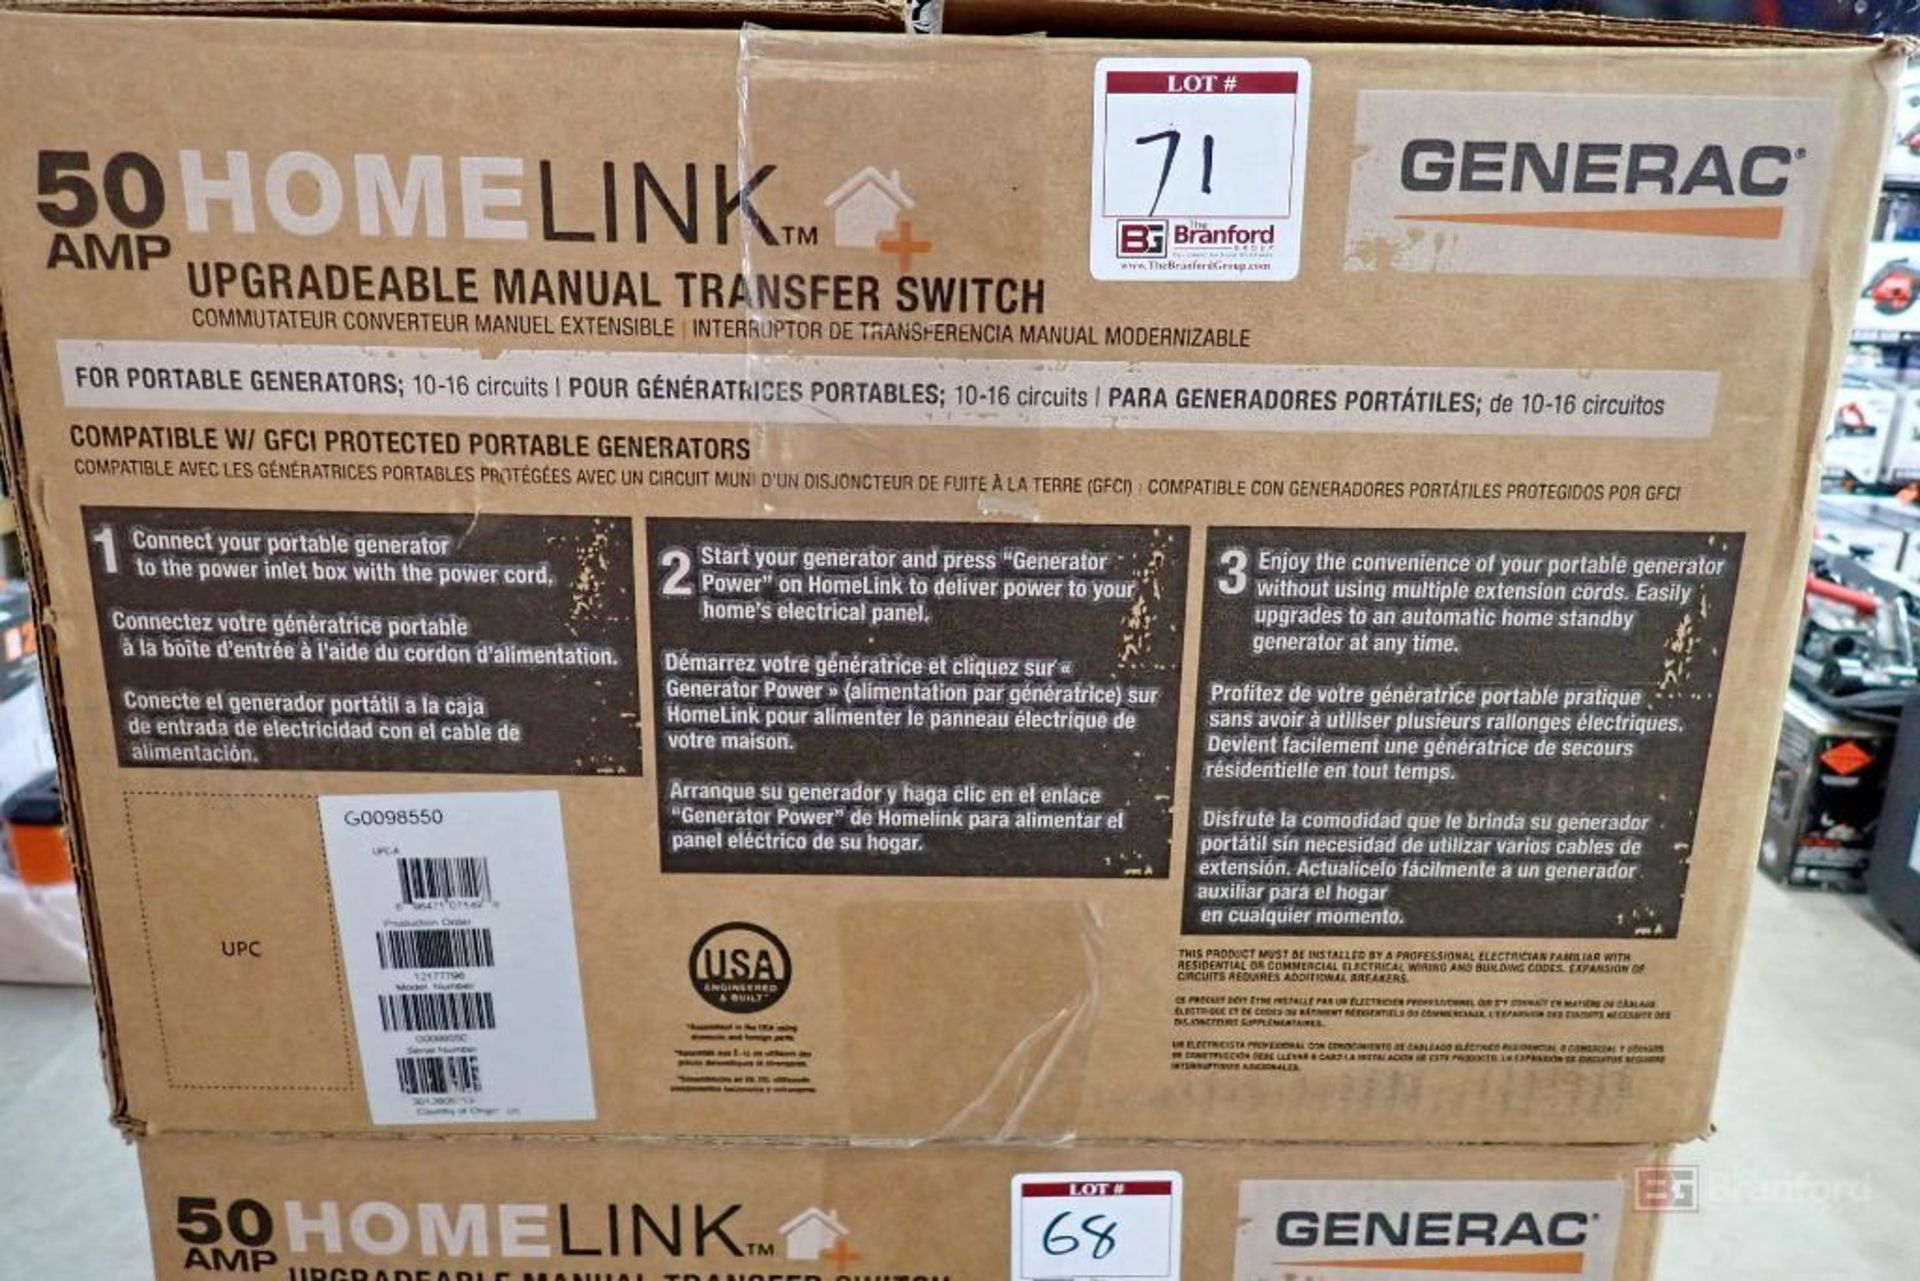 GENERAC GNR98550 HomeLink 50 AMP Upgradeable Manual Transfer Switch